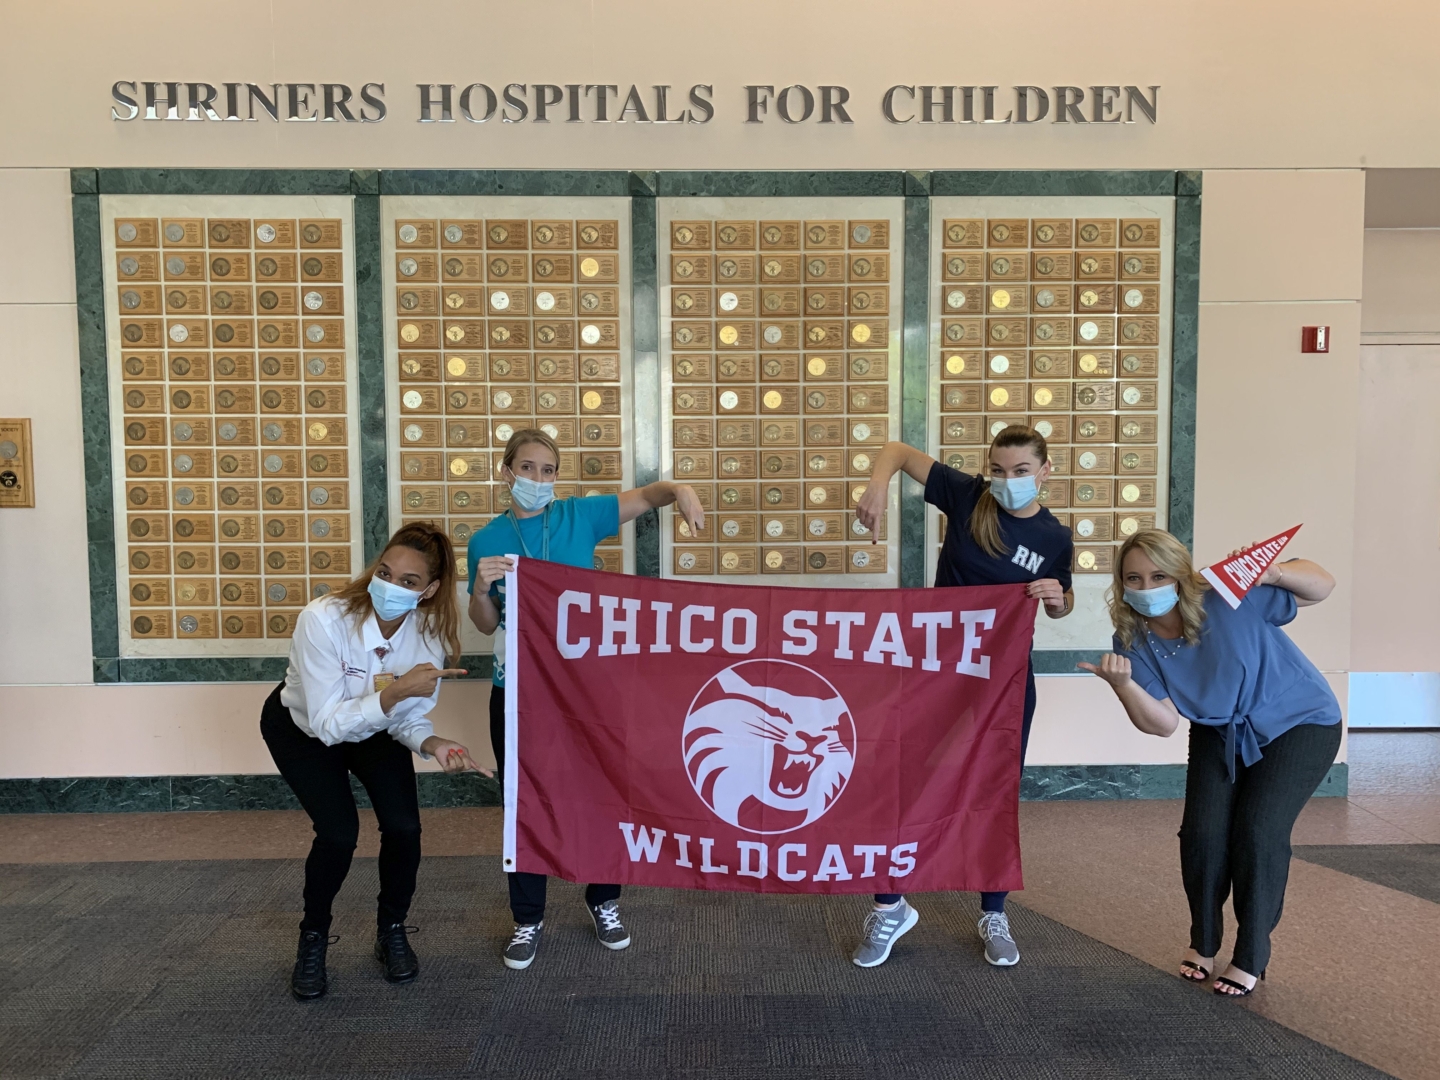 Four masked women pose with a Chico Sate Wildcats flag at Shriners Hospital